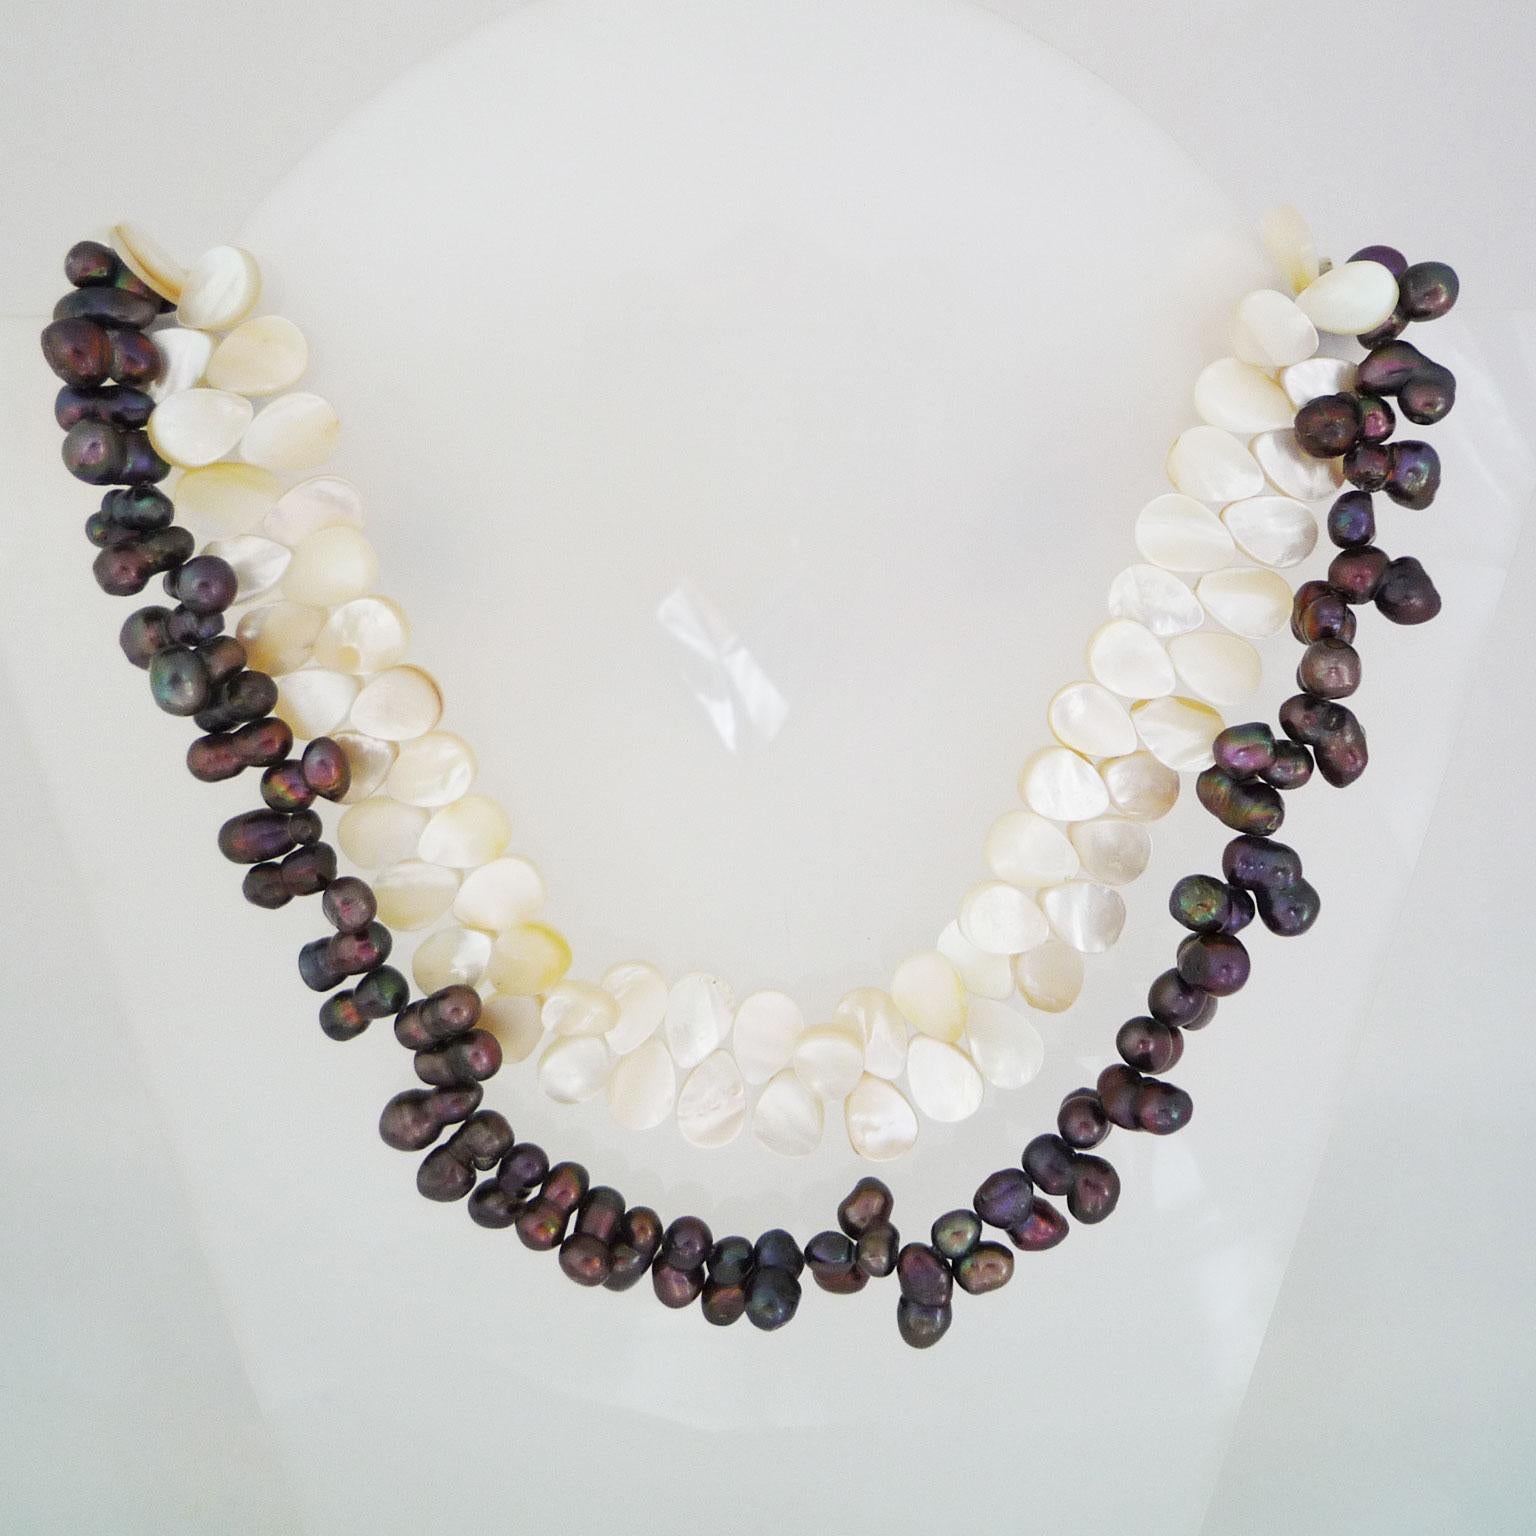 Necklace made of dark pearls and mother-of-pearl plates
double row necklace made of dark pearls and mother-of-pearl plates connected at the clasp with hearts made of agate
magnetic fastener

Hand-knotted.
Modern design object.
Chain length 53